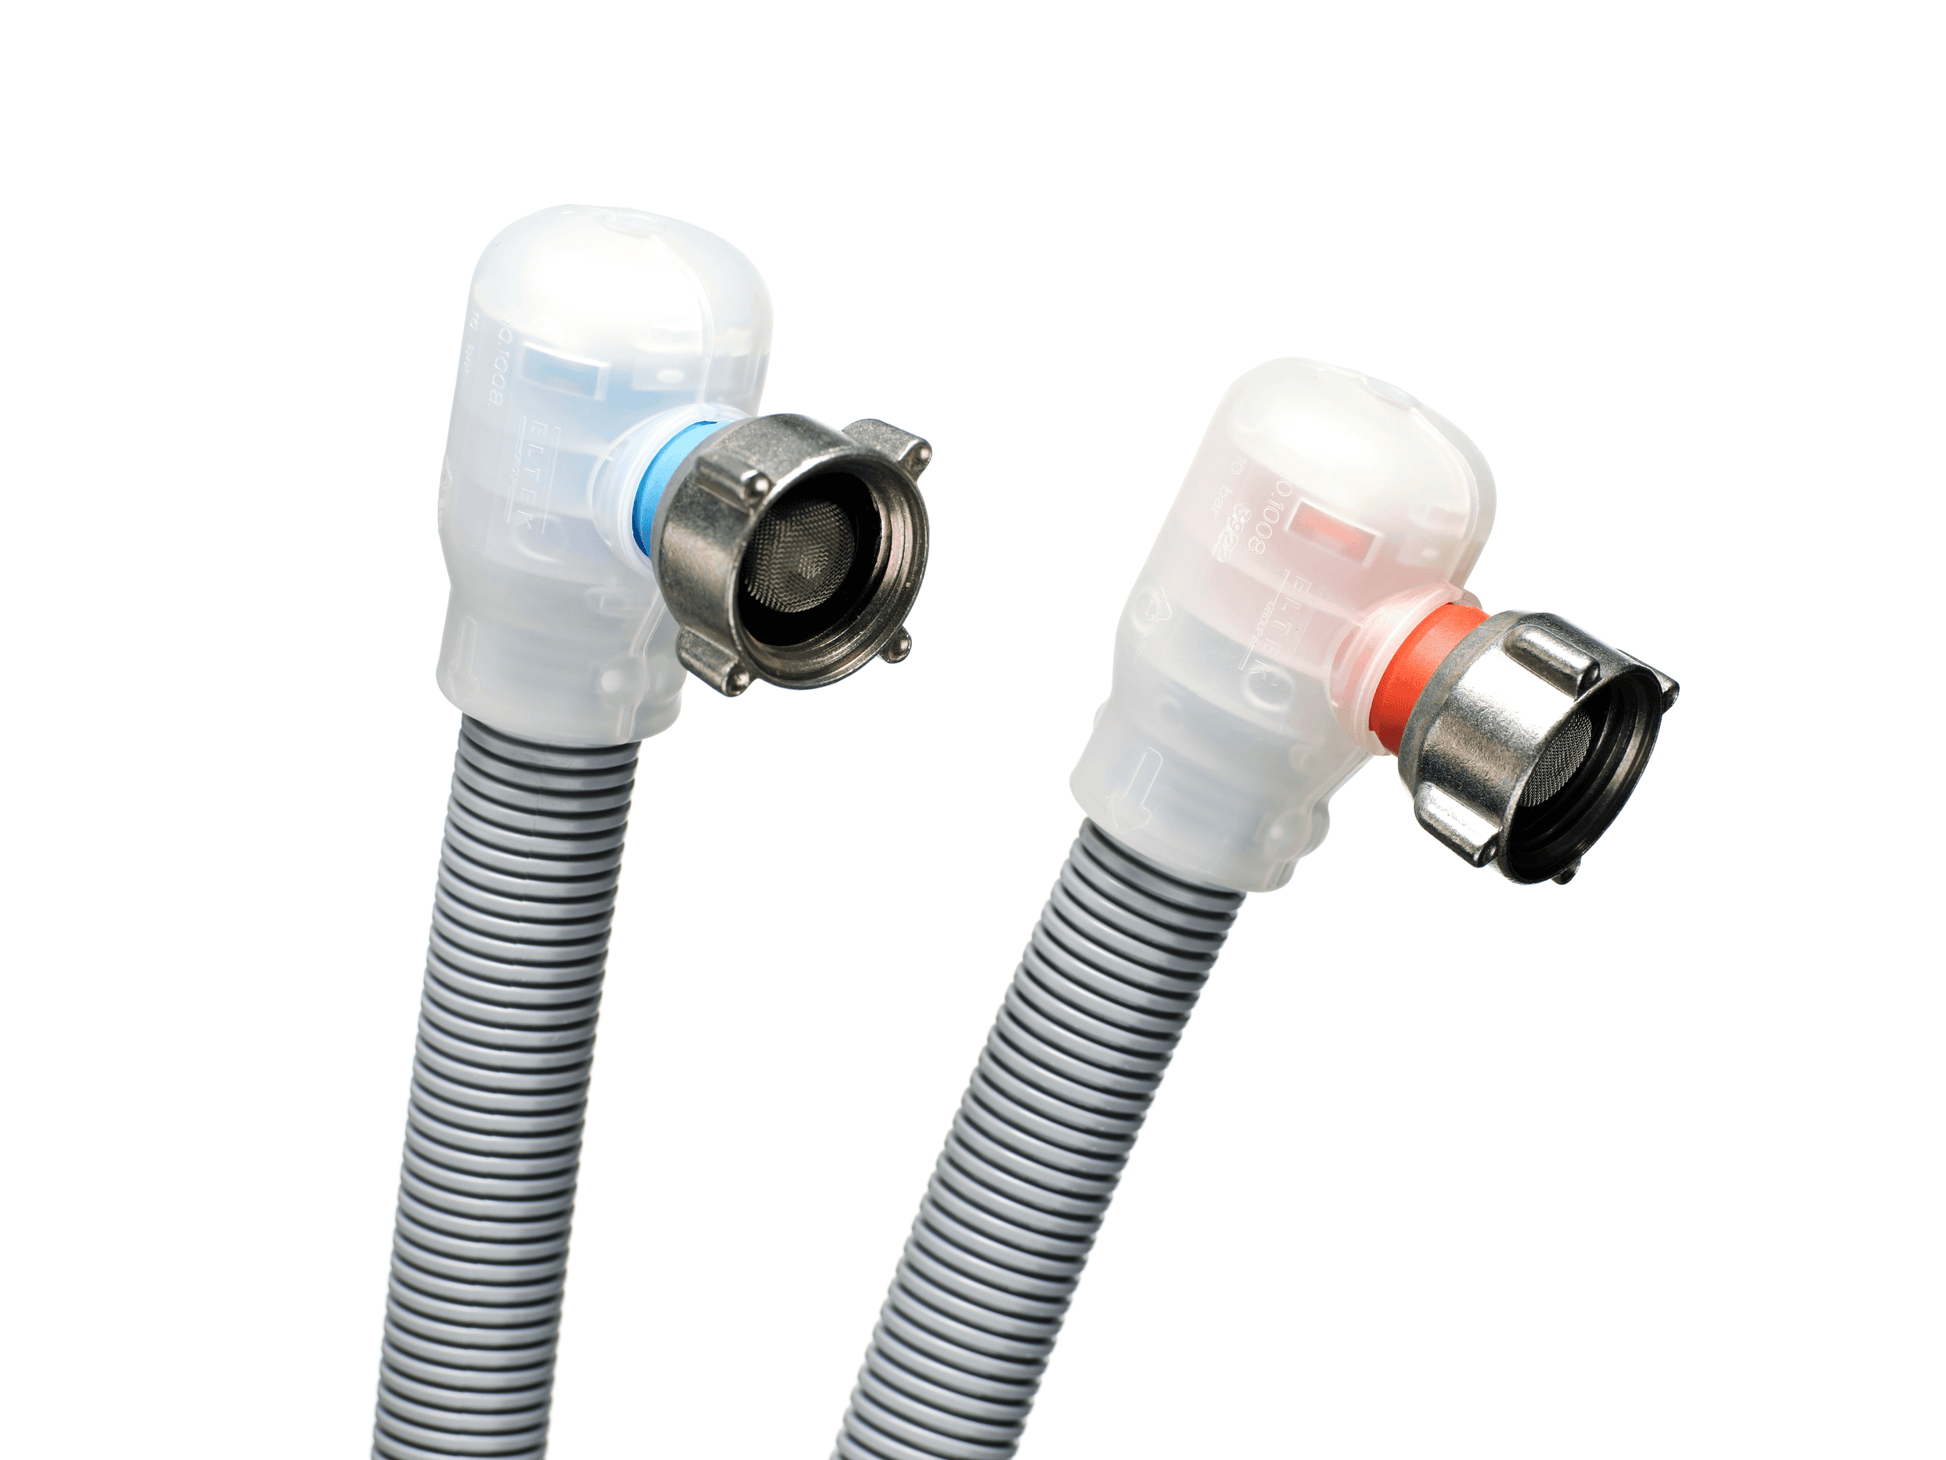 Hot and cold water flood prevention hoses